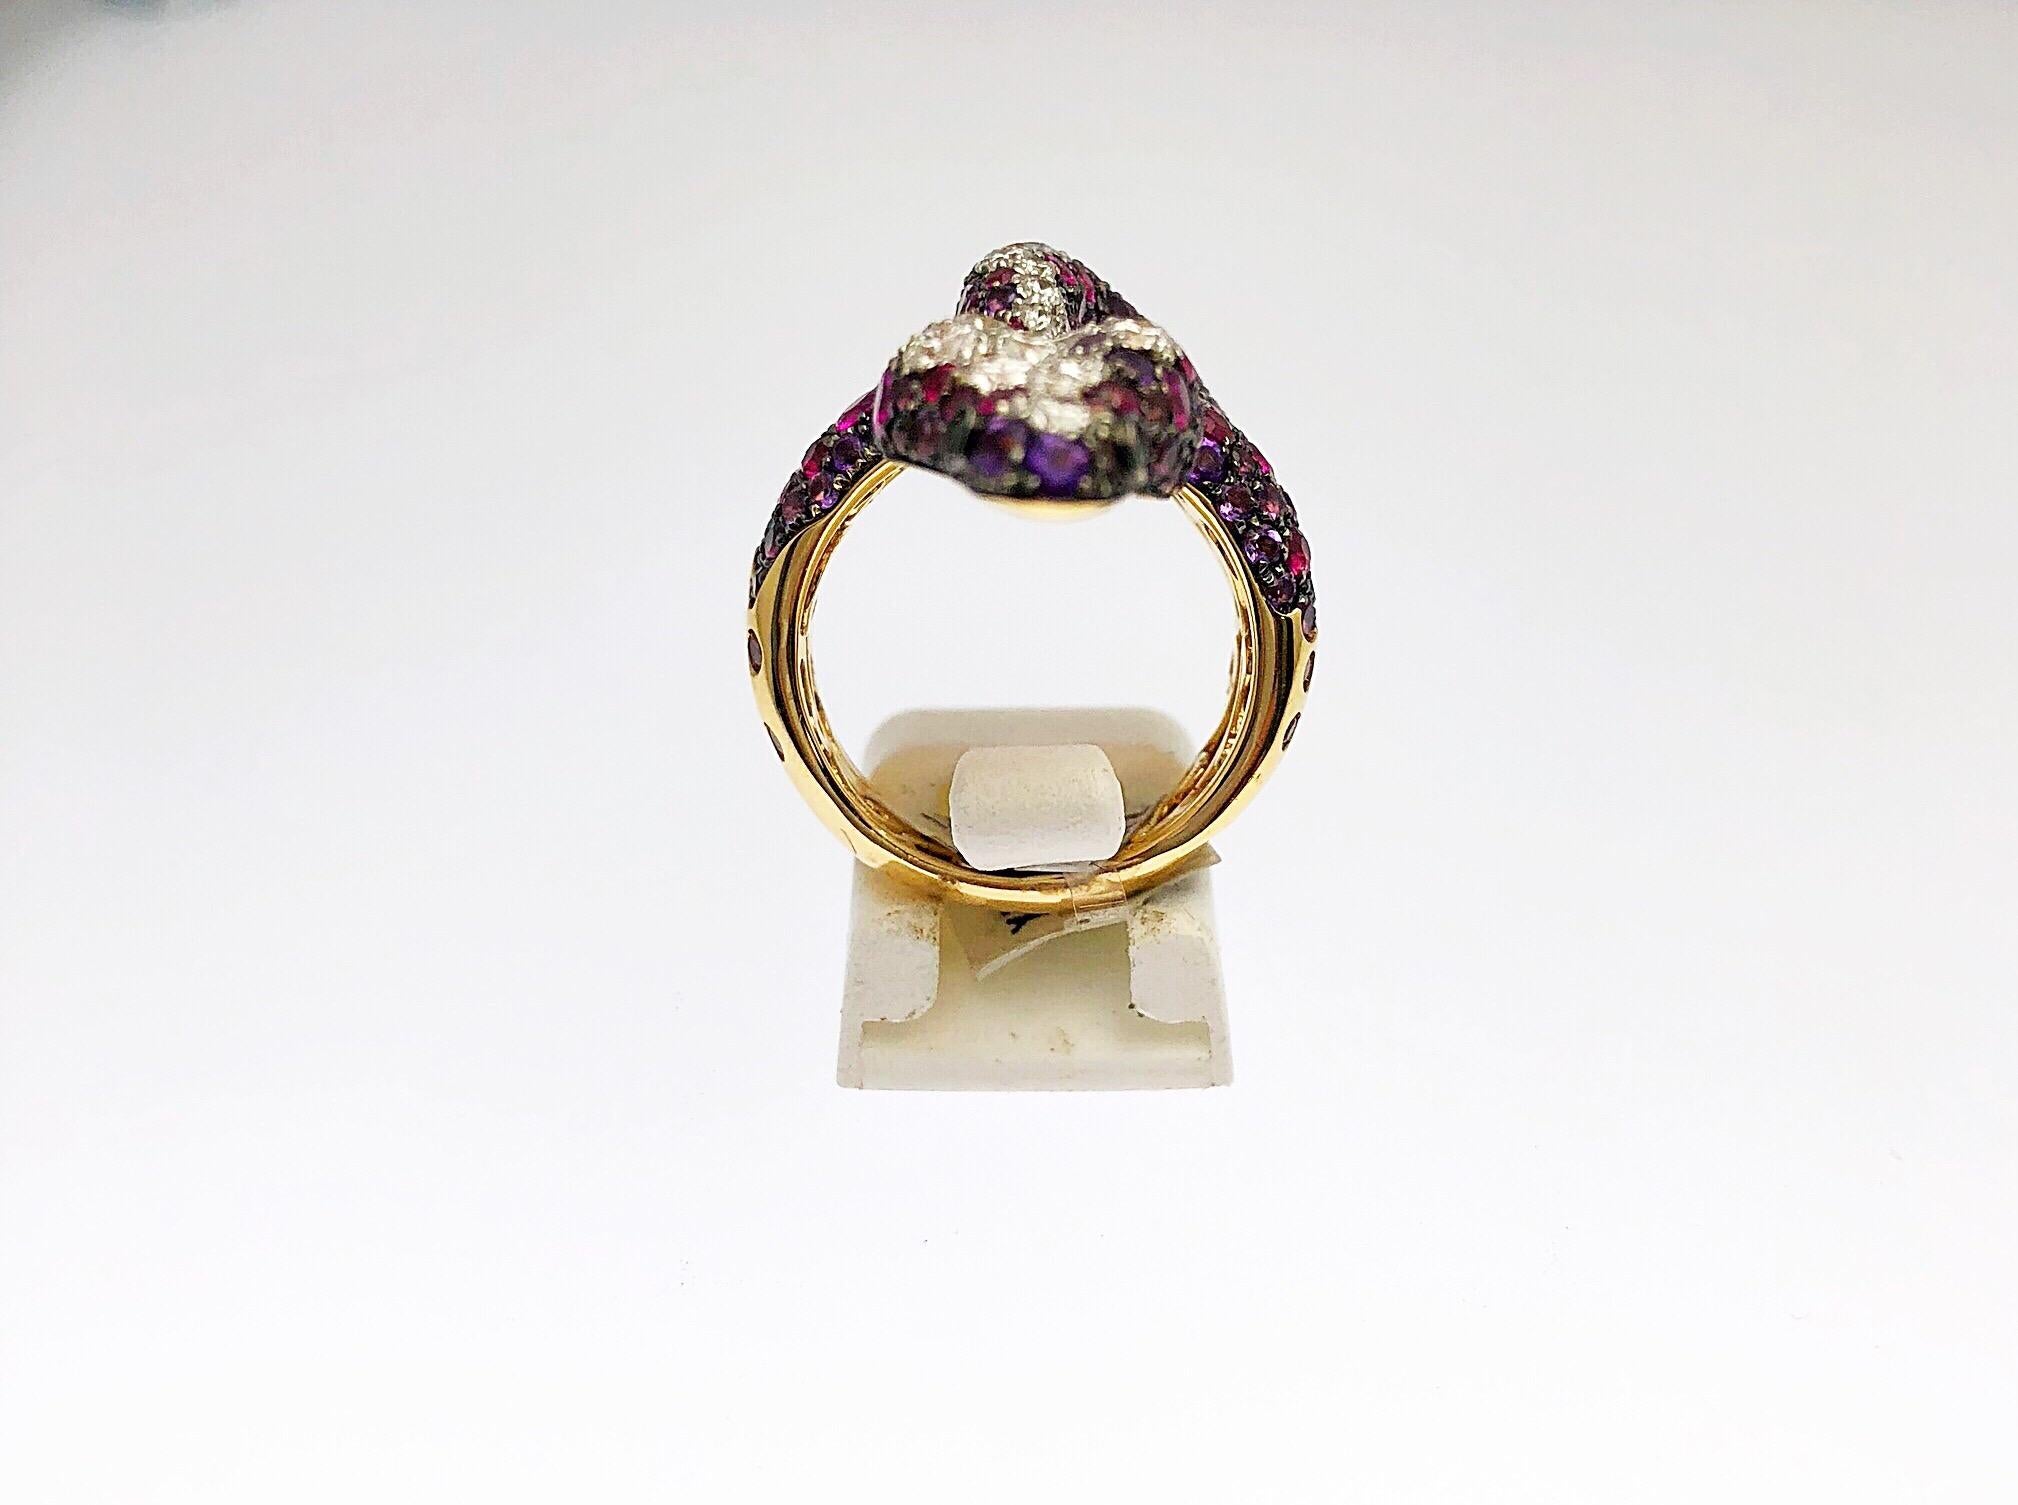 Modern Bruno Crivelli 18 Karat Rose Gold Snake Ring with Ruby, Diamond and Amethyst For Sale